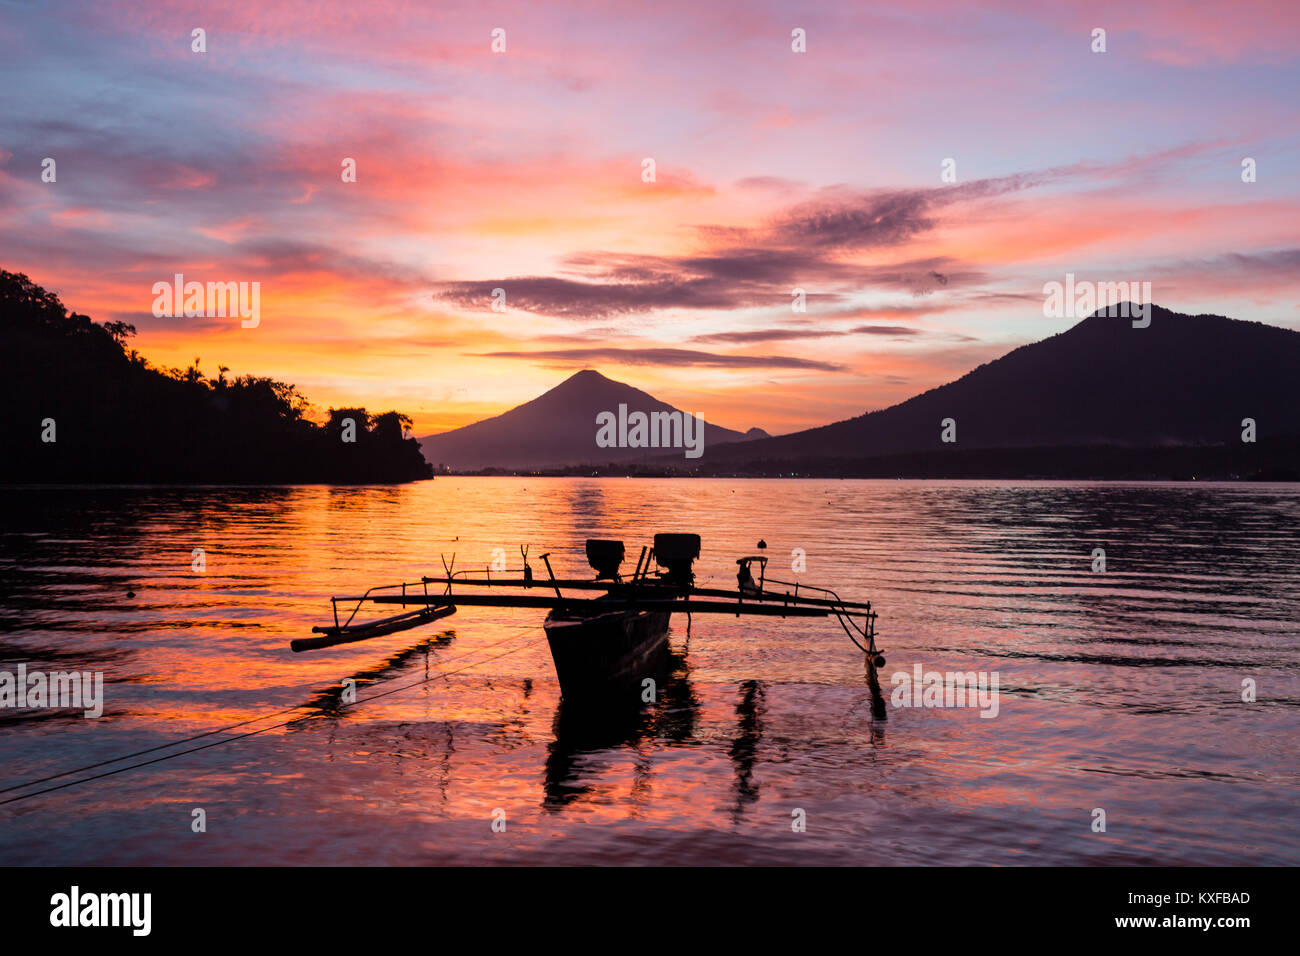 A junkong boat rests on calm water during a rich sunset afterglow in Indonesia's famed Lembeh Strait. Stock Photo